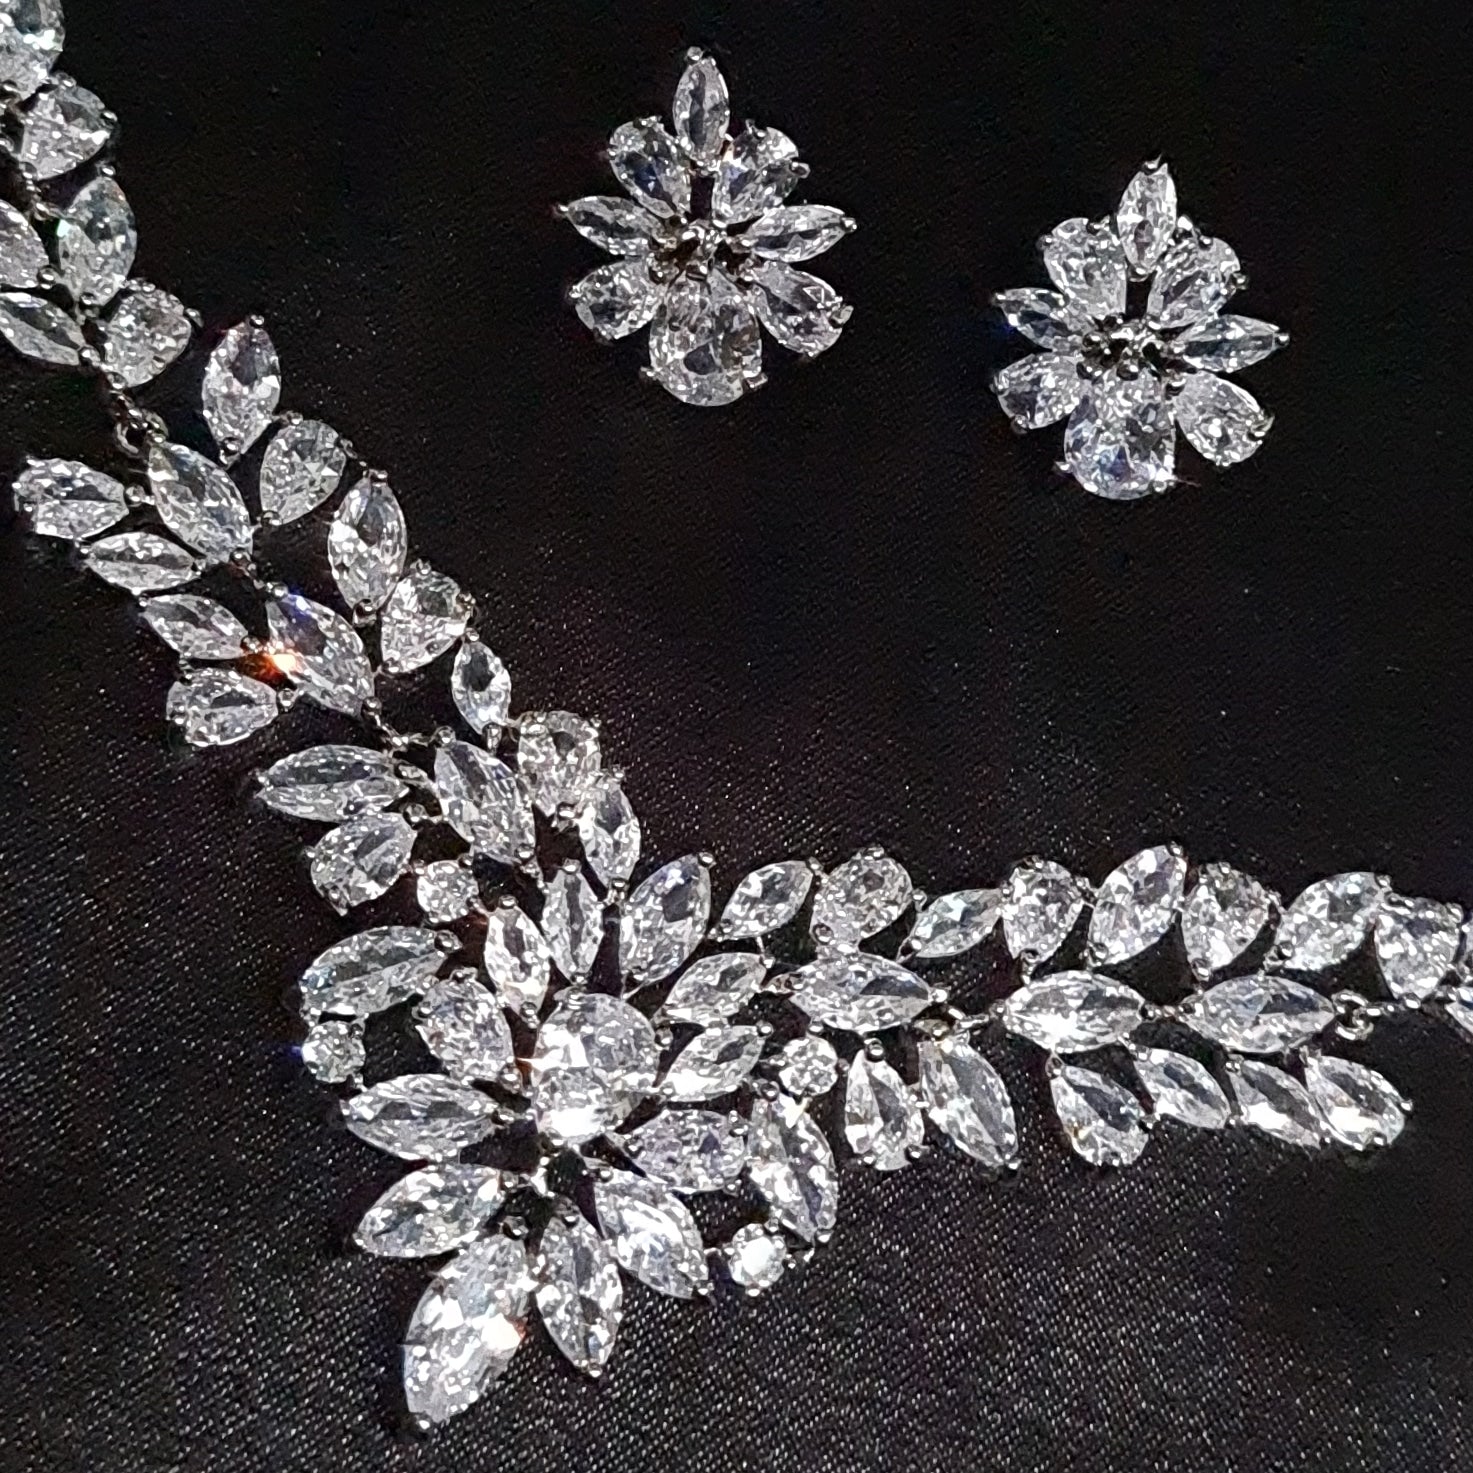 Anne Marie necklace with intricate floral design and sparkling cubic zirconia stones.